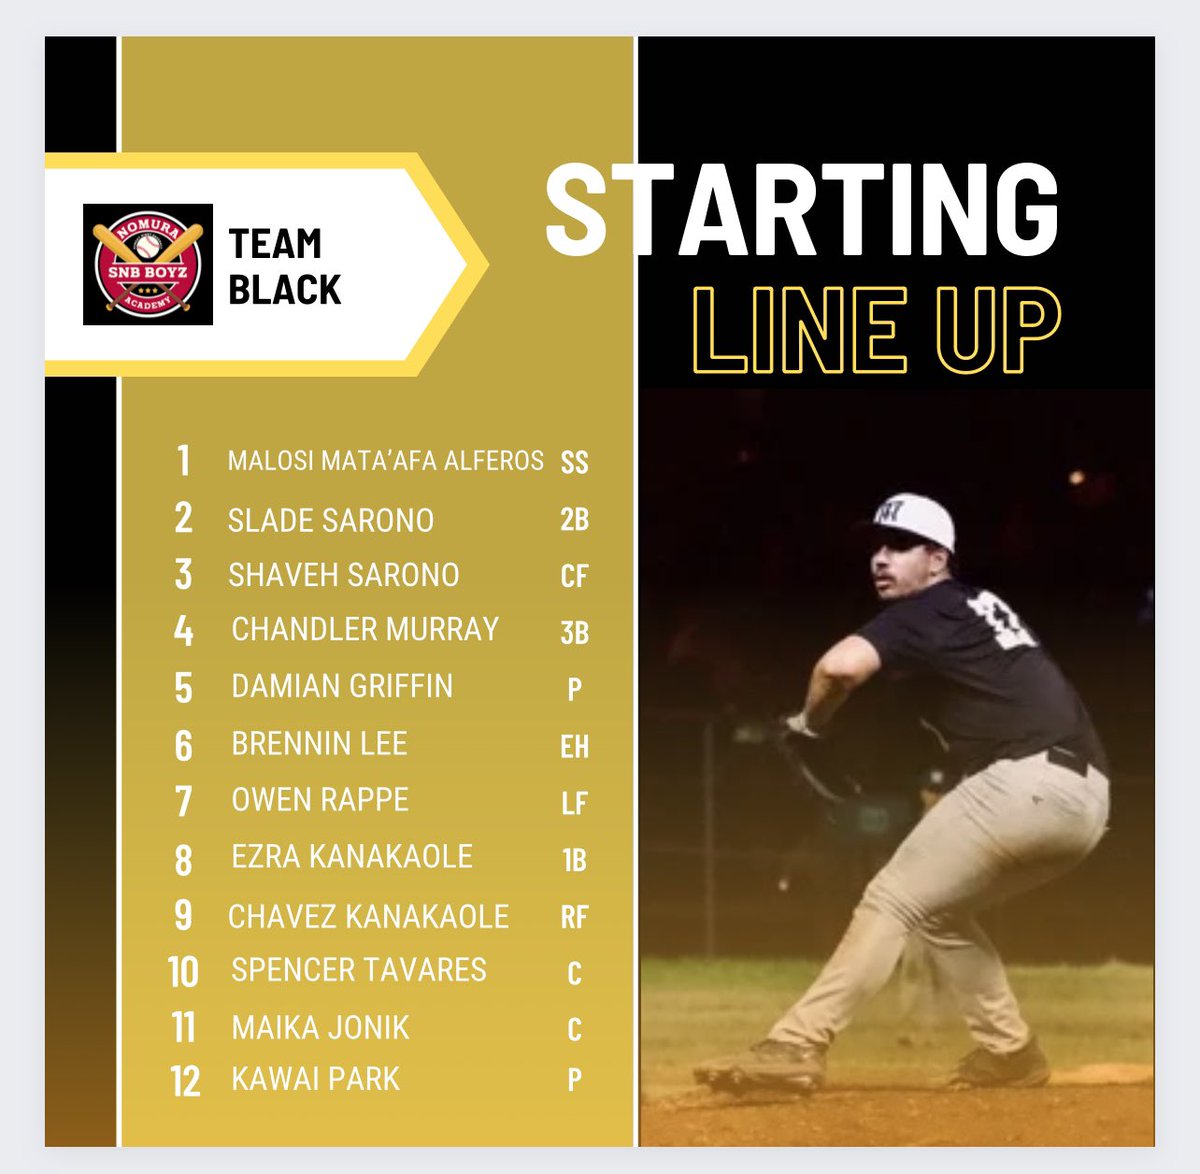 Batting Lineup: Team Black Features some college commits and some left handed hitting. Also a 2027 catcher from Maui. #SNBonOahu || @NomuraAcademy